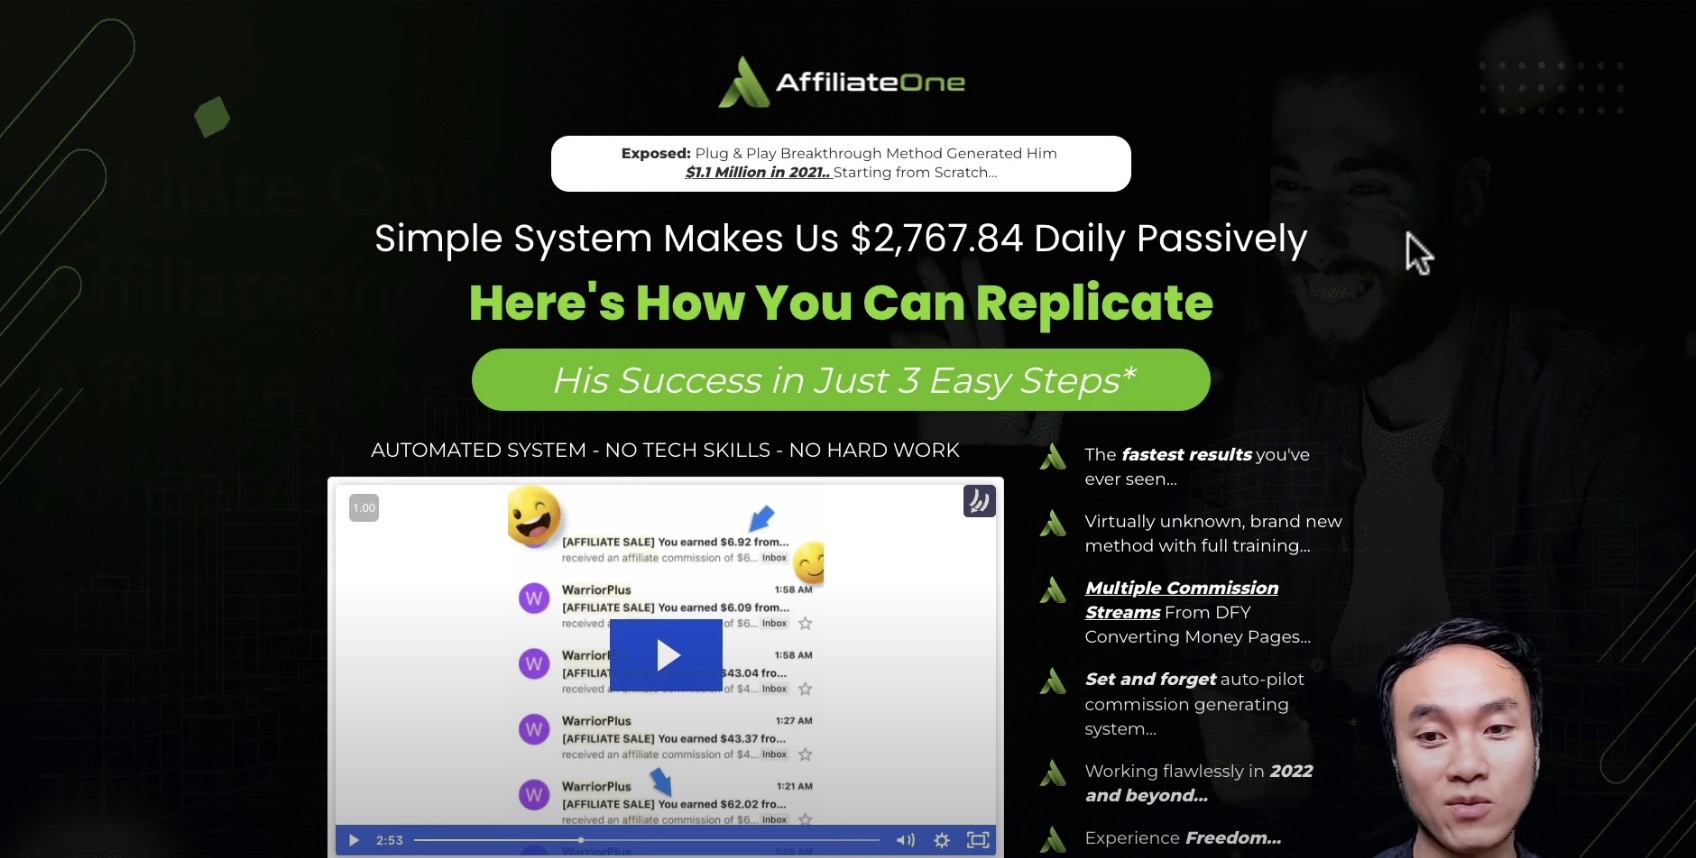 Affiliate One Review